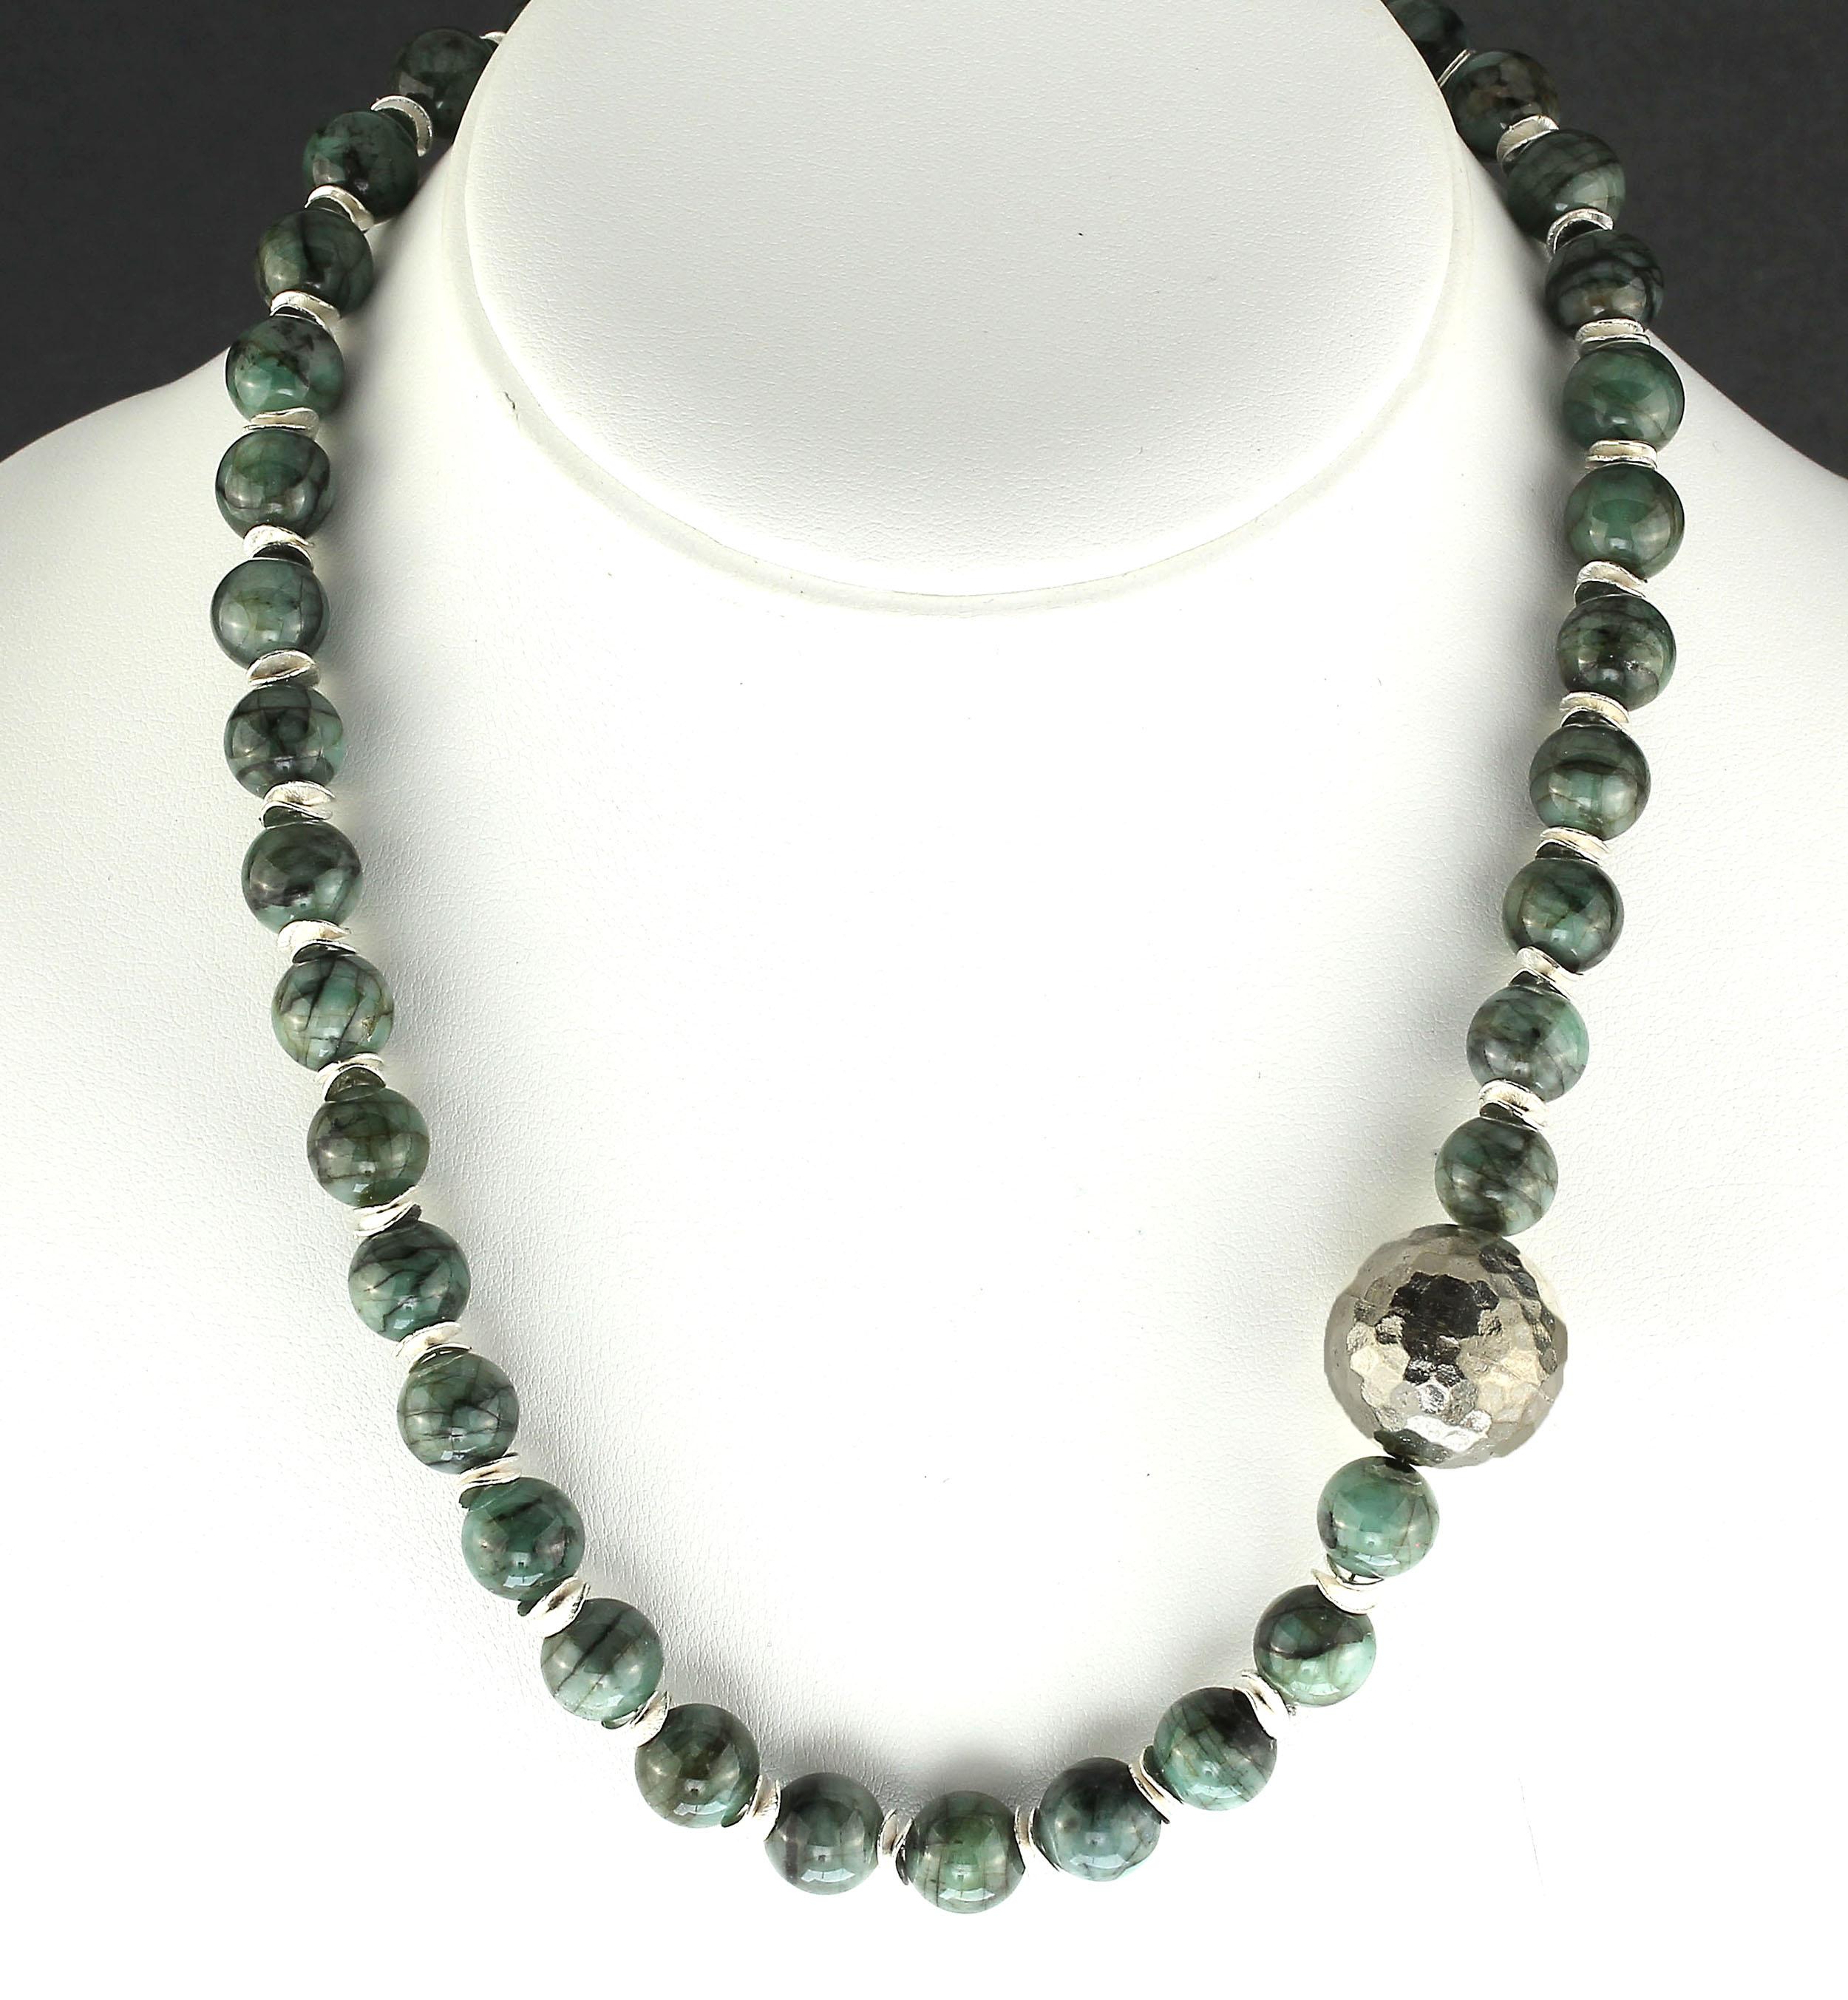 One of a kind Emerald in matrix necklace accented with pure Silver 20 MM faceted focal which is just off the front center for interest. These 10 MM highly polished Emerald in matrix are enhanced with silver tone flutters. This unique Gemjunky